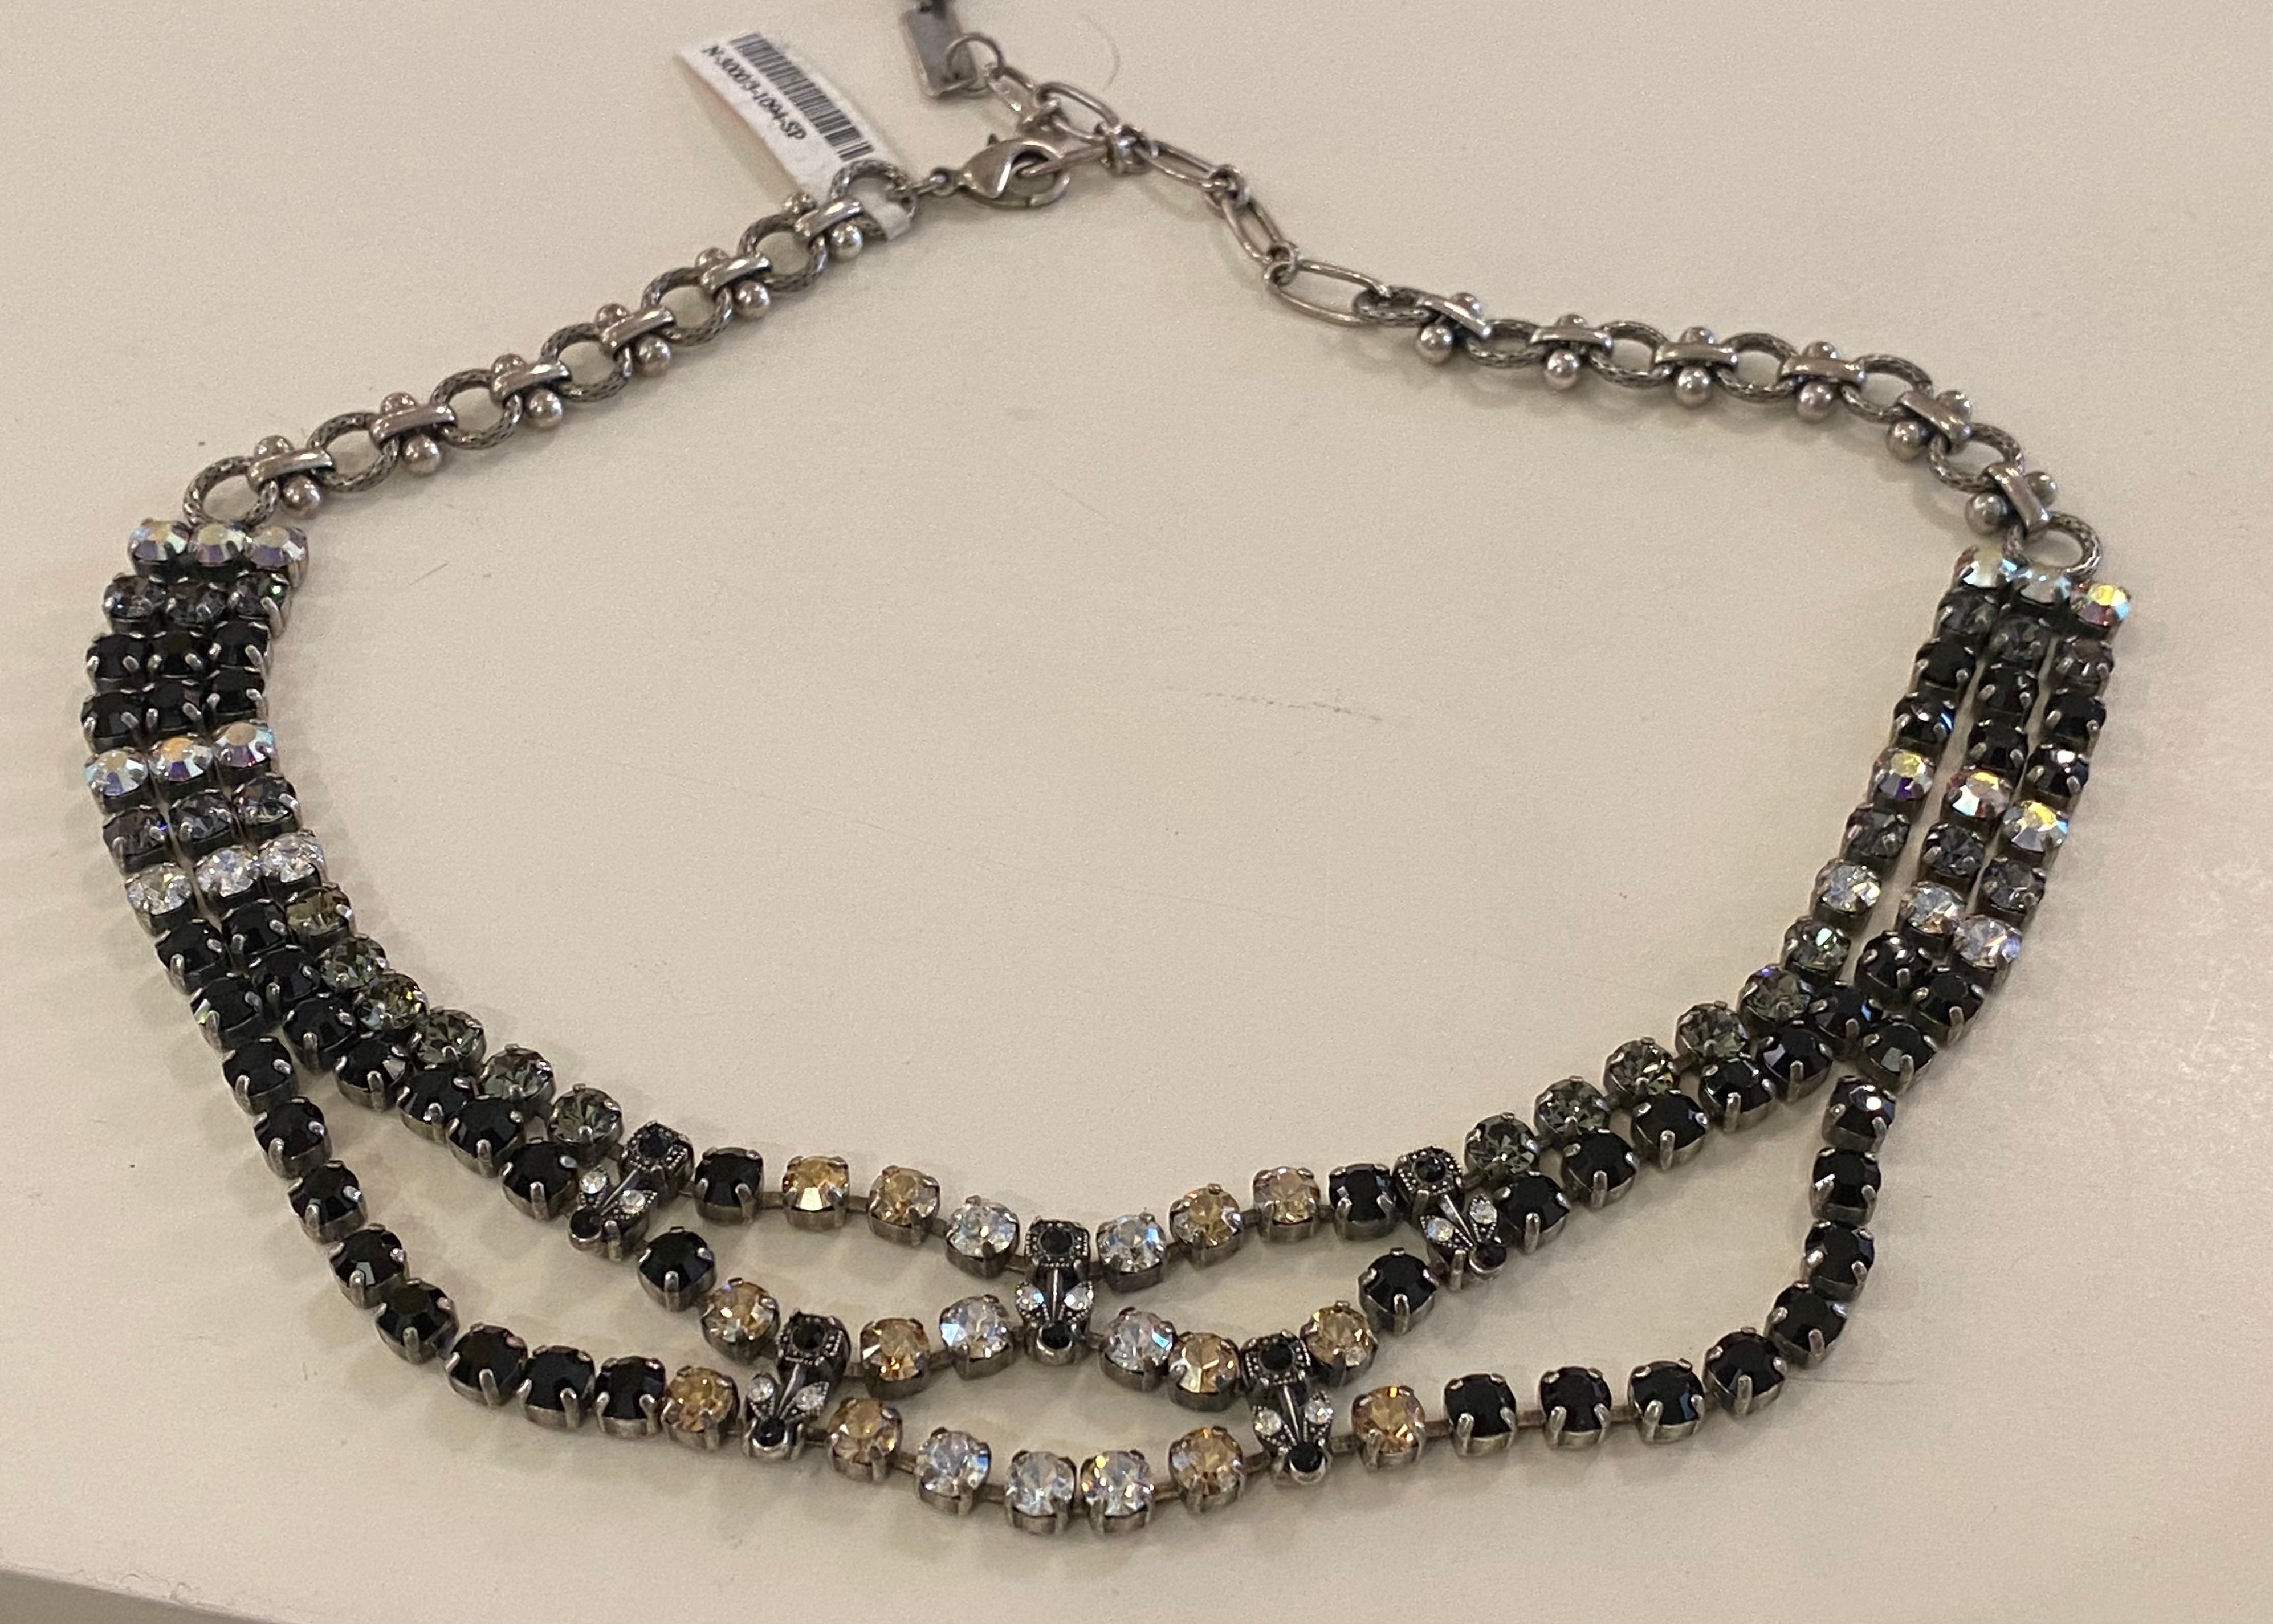 Mariana Antiqued Silver Extra Fancy Three Strand Crystal Necklace in Elegant Black and Gray